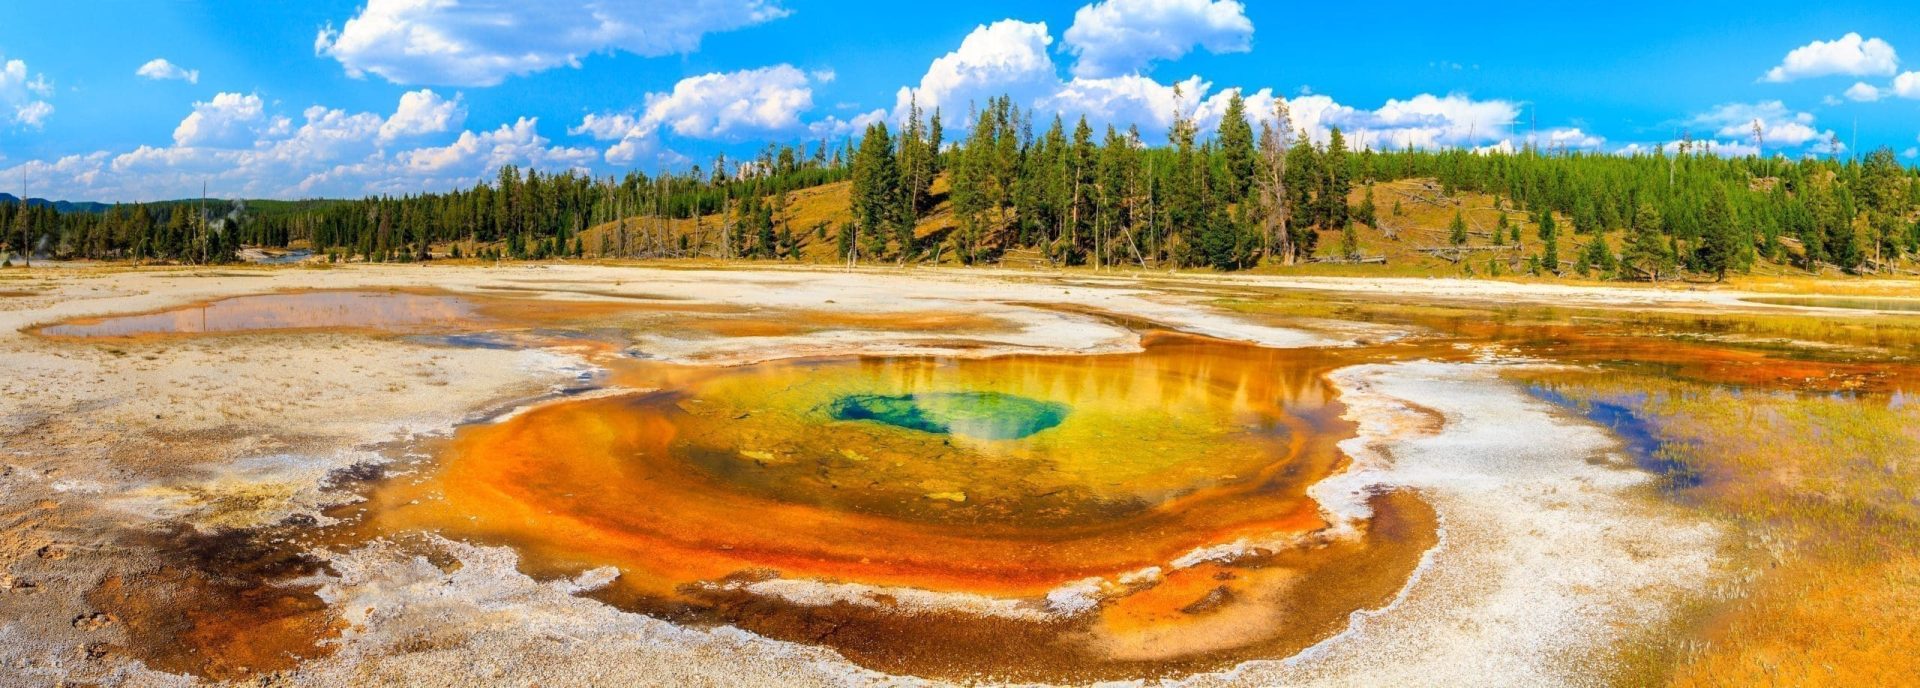 7 Reasons a Self-Guided Tour Is the Best Way to See Yellowstone